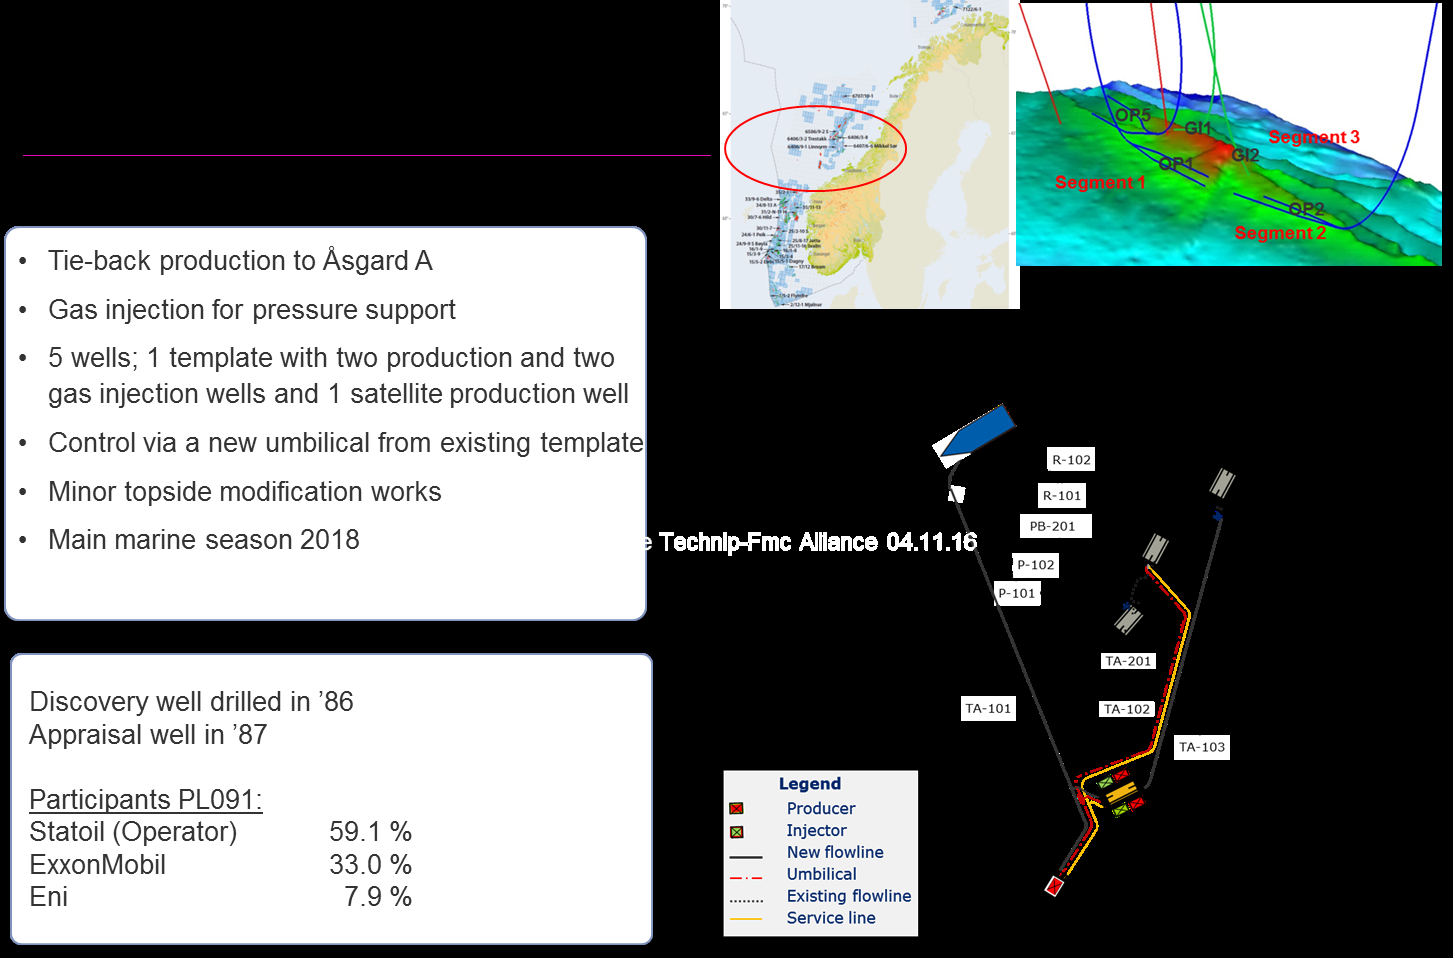 Trestakk Summary 4 Tie-back production to Åsgard A 4 Gas injection for pressure suport 4 5 wells; 1 template with 2 production and 2 gas injection wells and 1 satellite production well 4 Control via